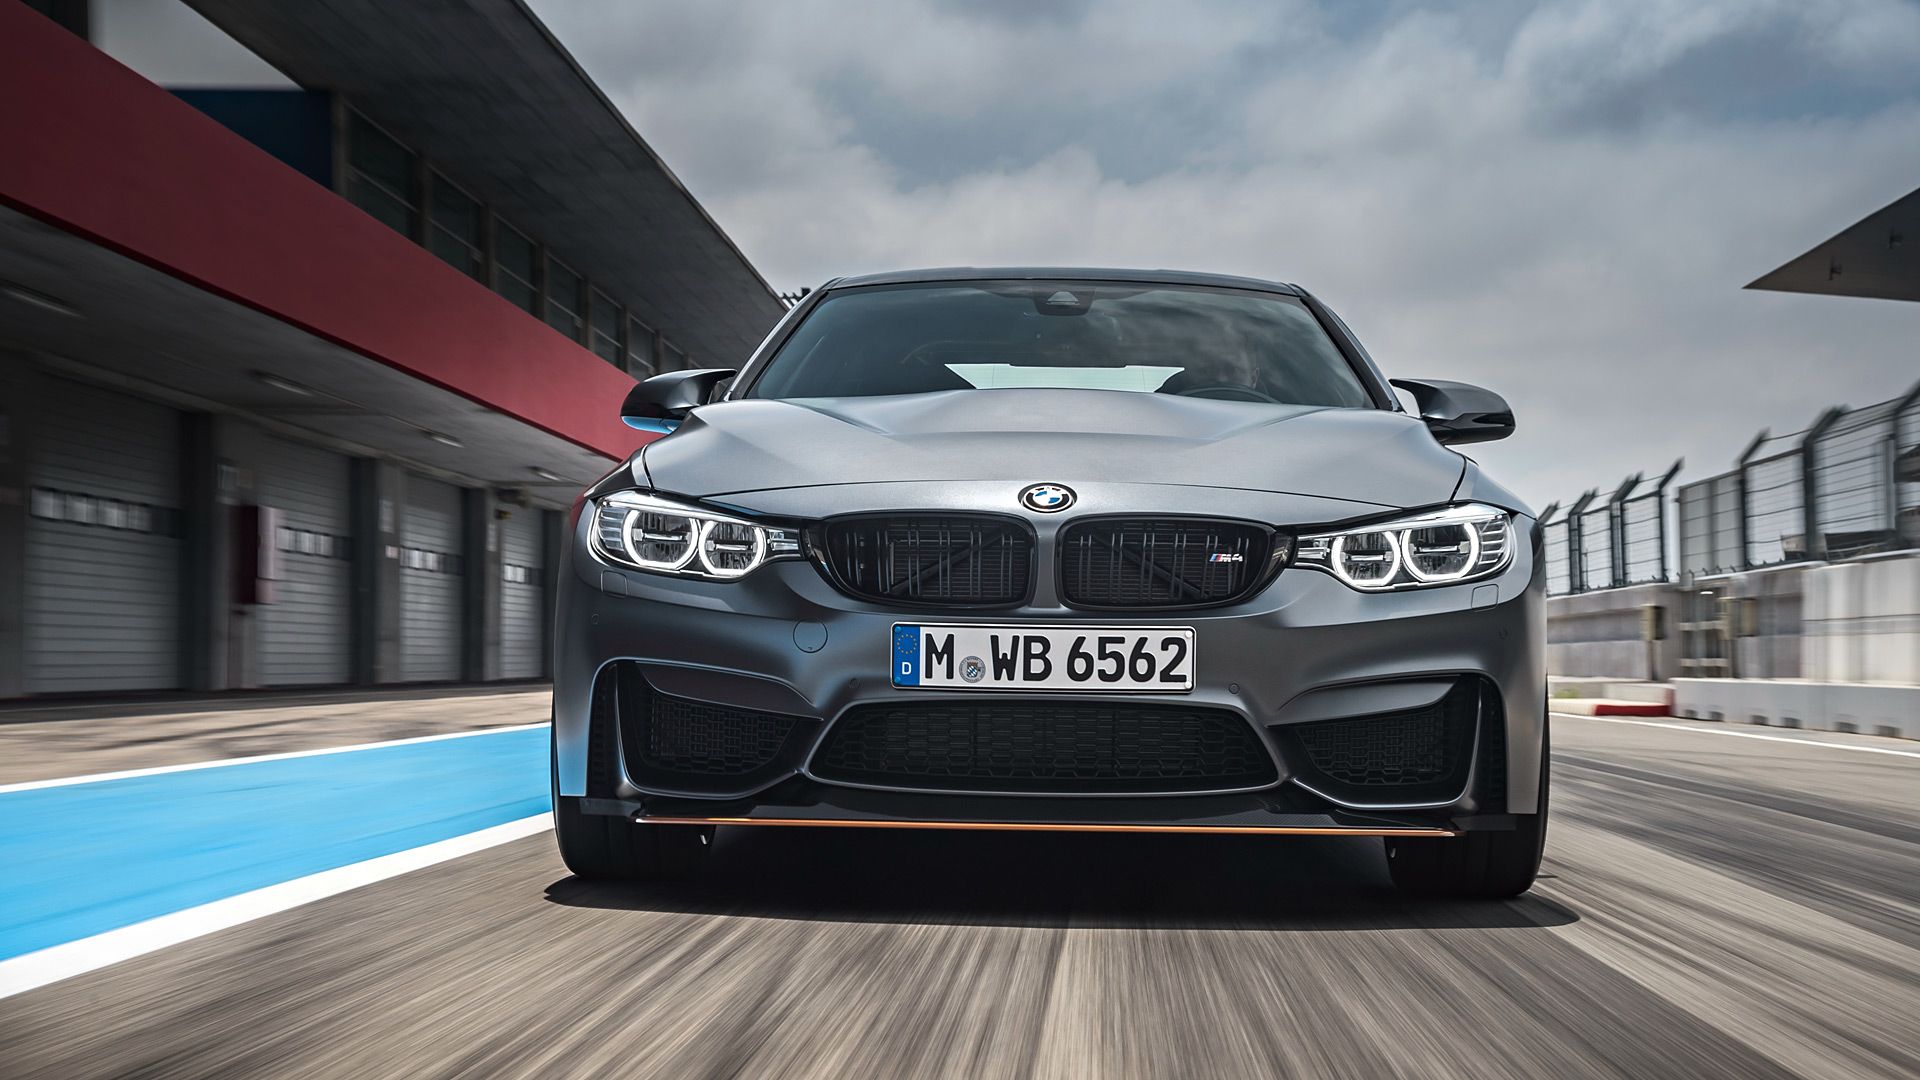 Bmw M4 Gts Concept Wallpapers